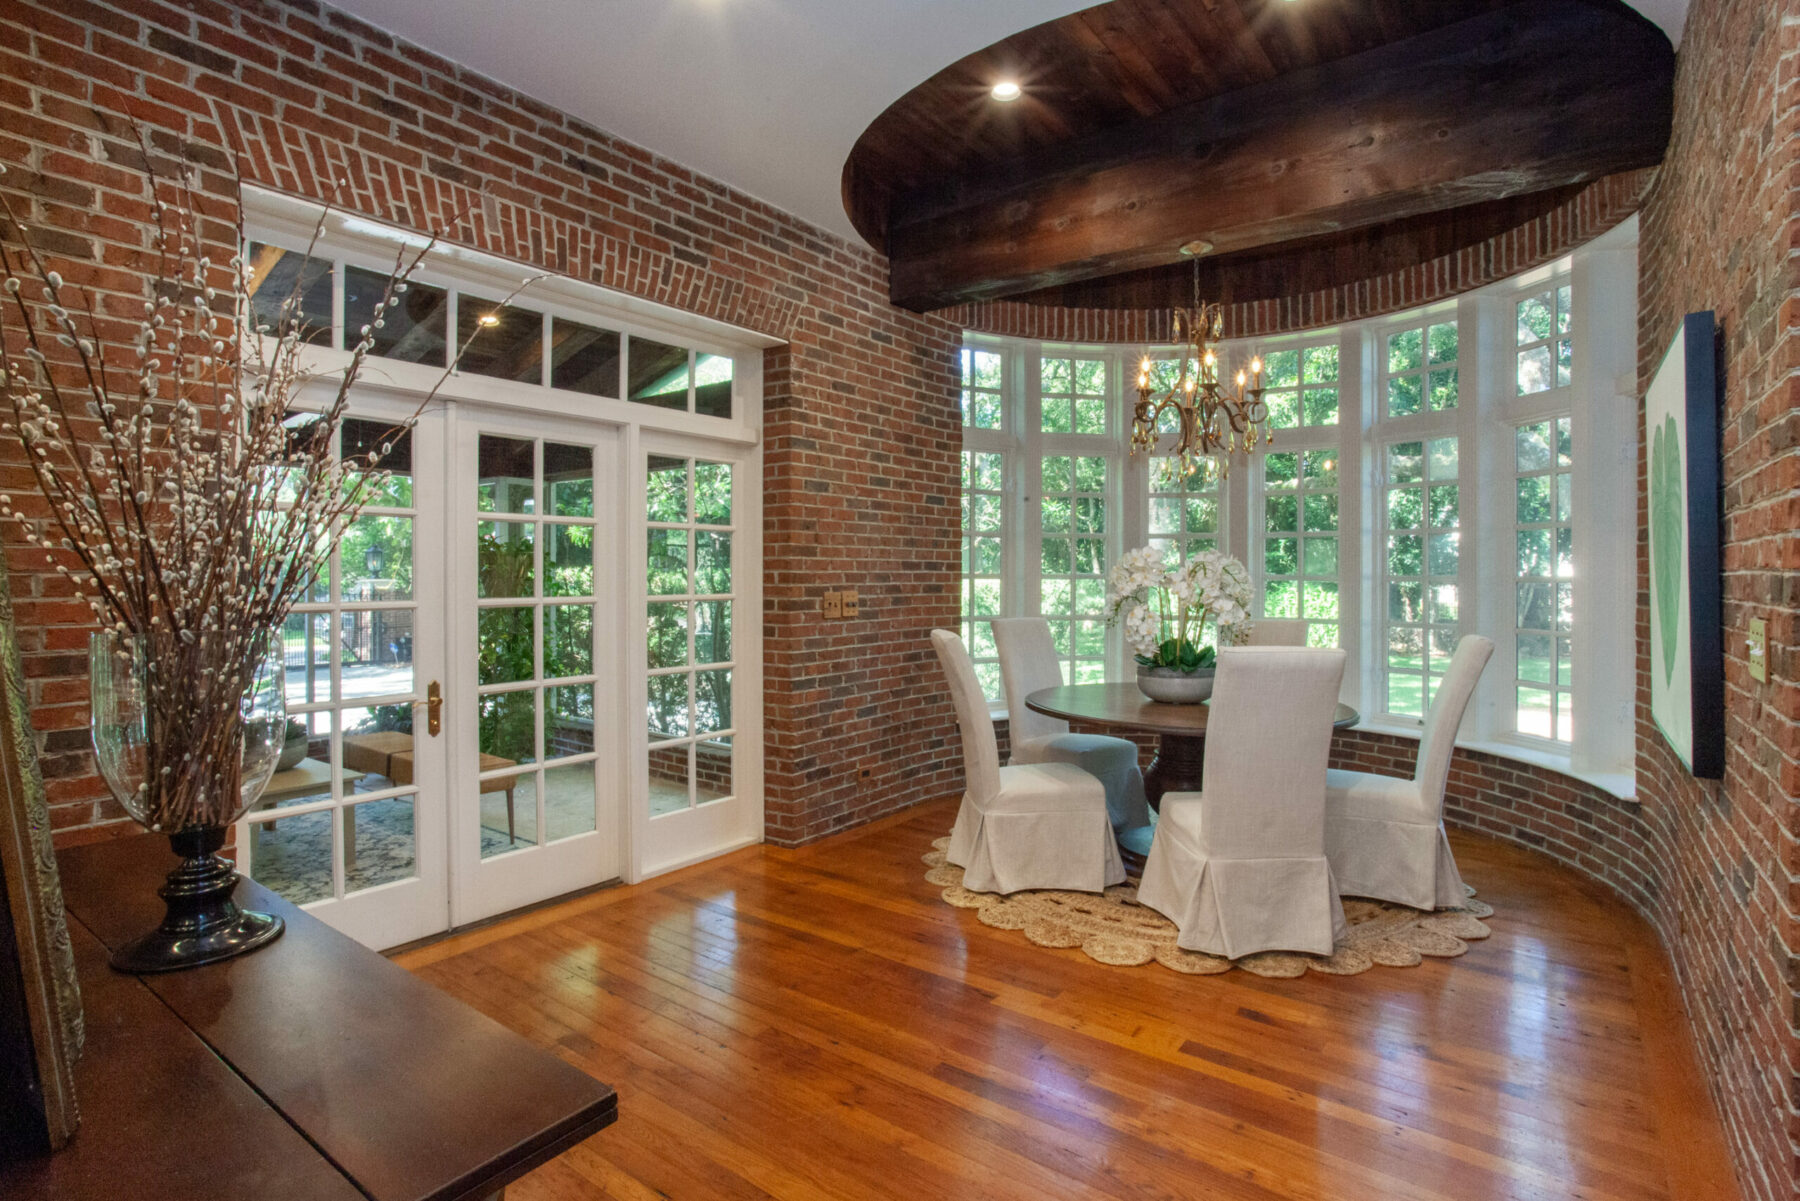 Dining room with an old-world charm designed by Tampa's Home Frosting